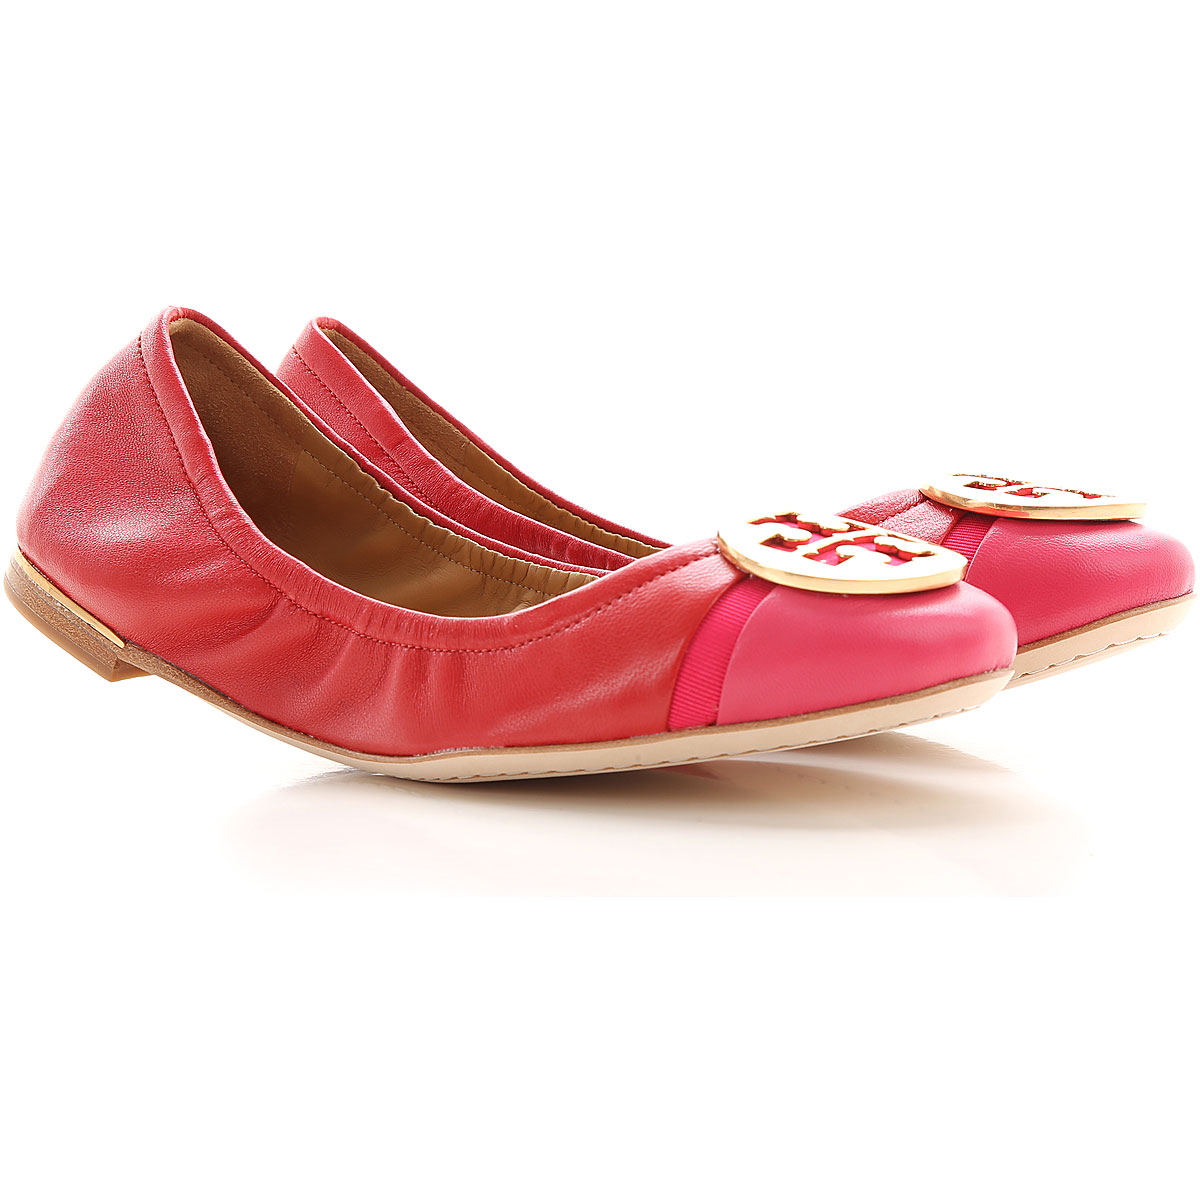 tory burch flats outlet